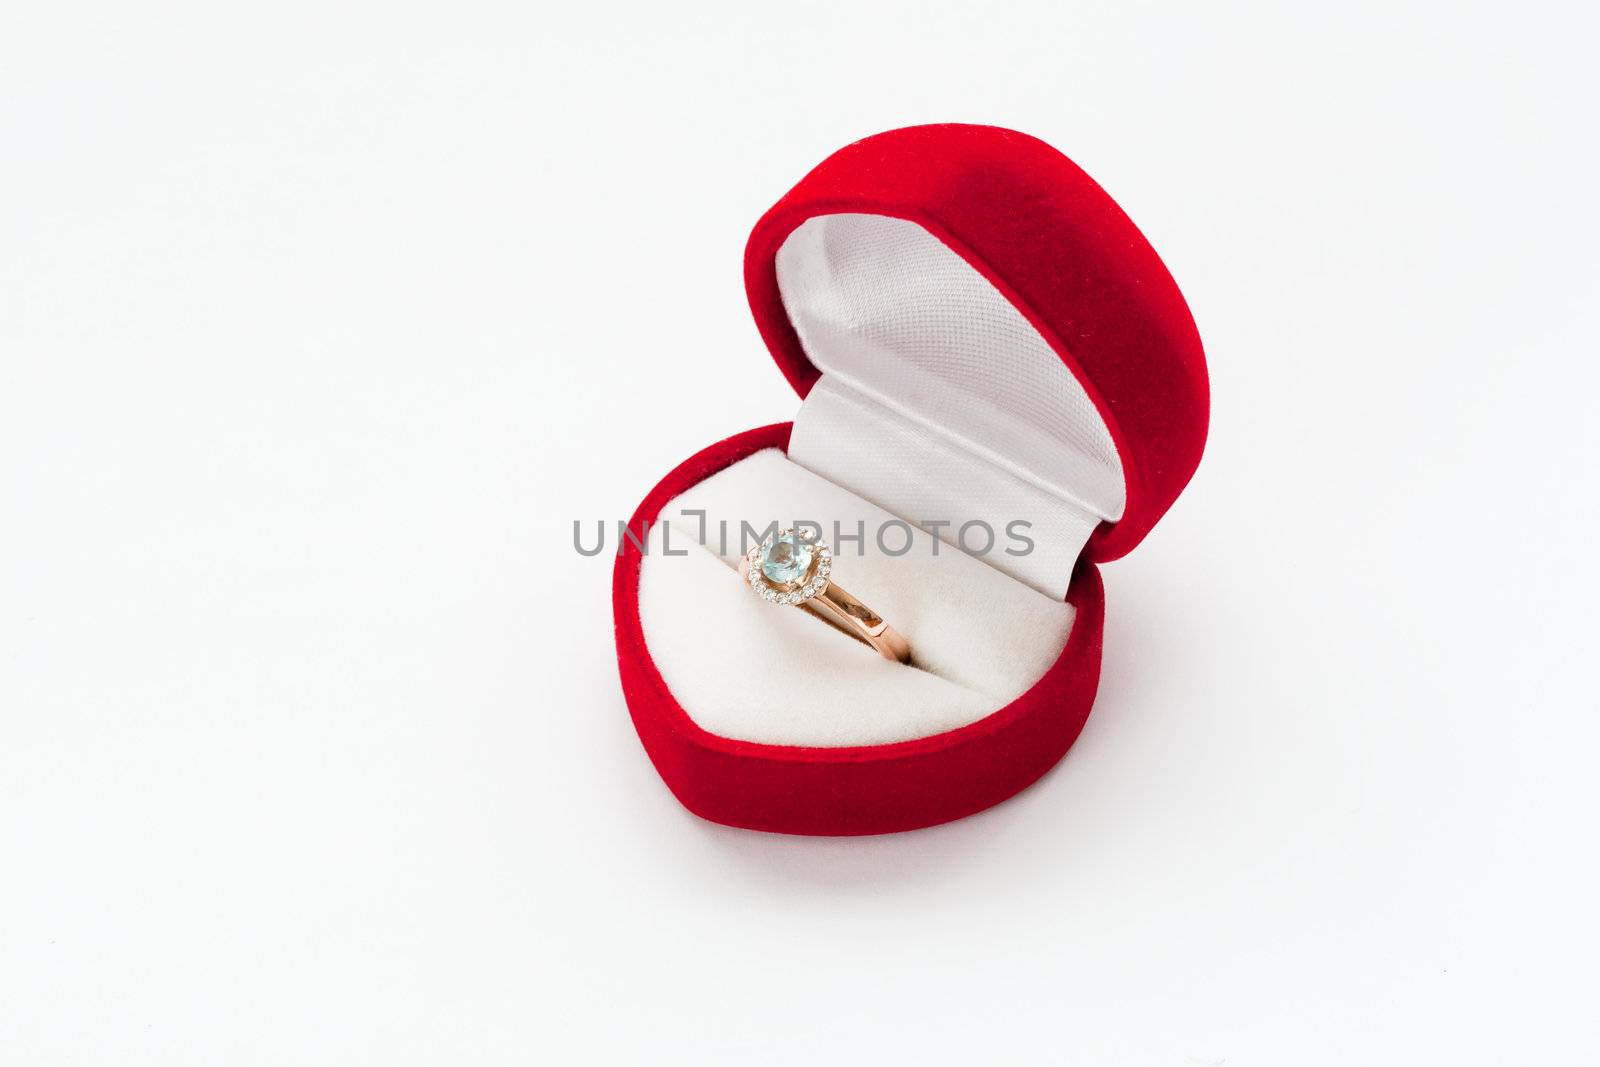 Gold ring with diamond in Red box by sfinks